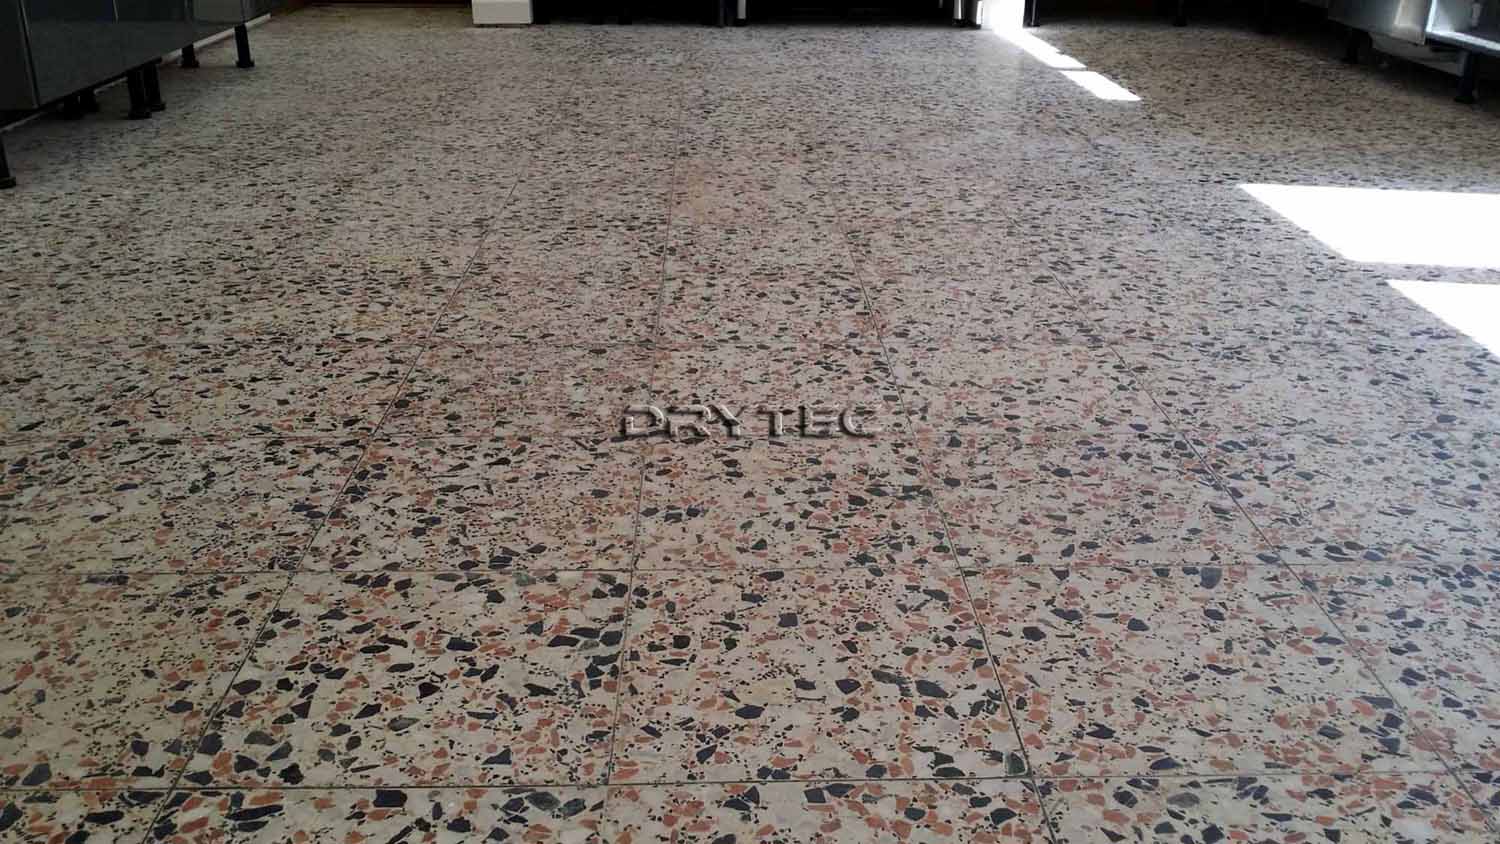 Terrazzo Floor Tiles Restoration-Grinding-Honing-Polishing-Cleaning and Sealing Service in Perth WA